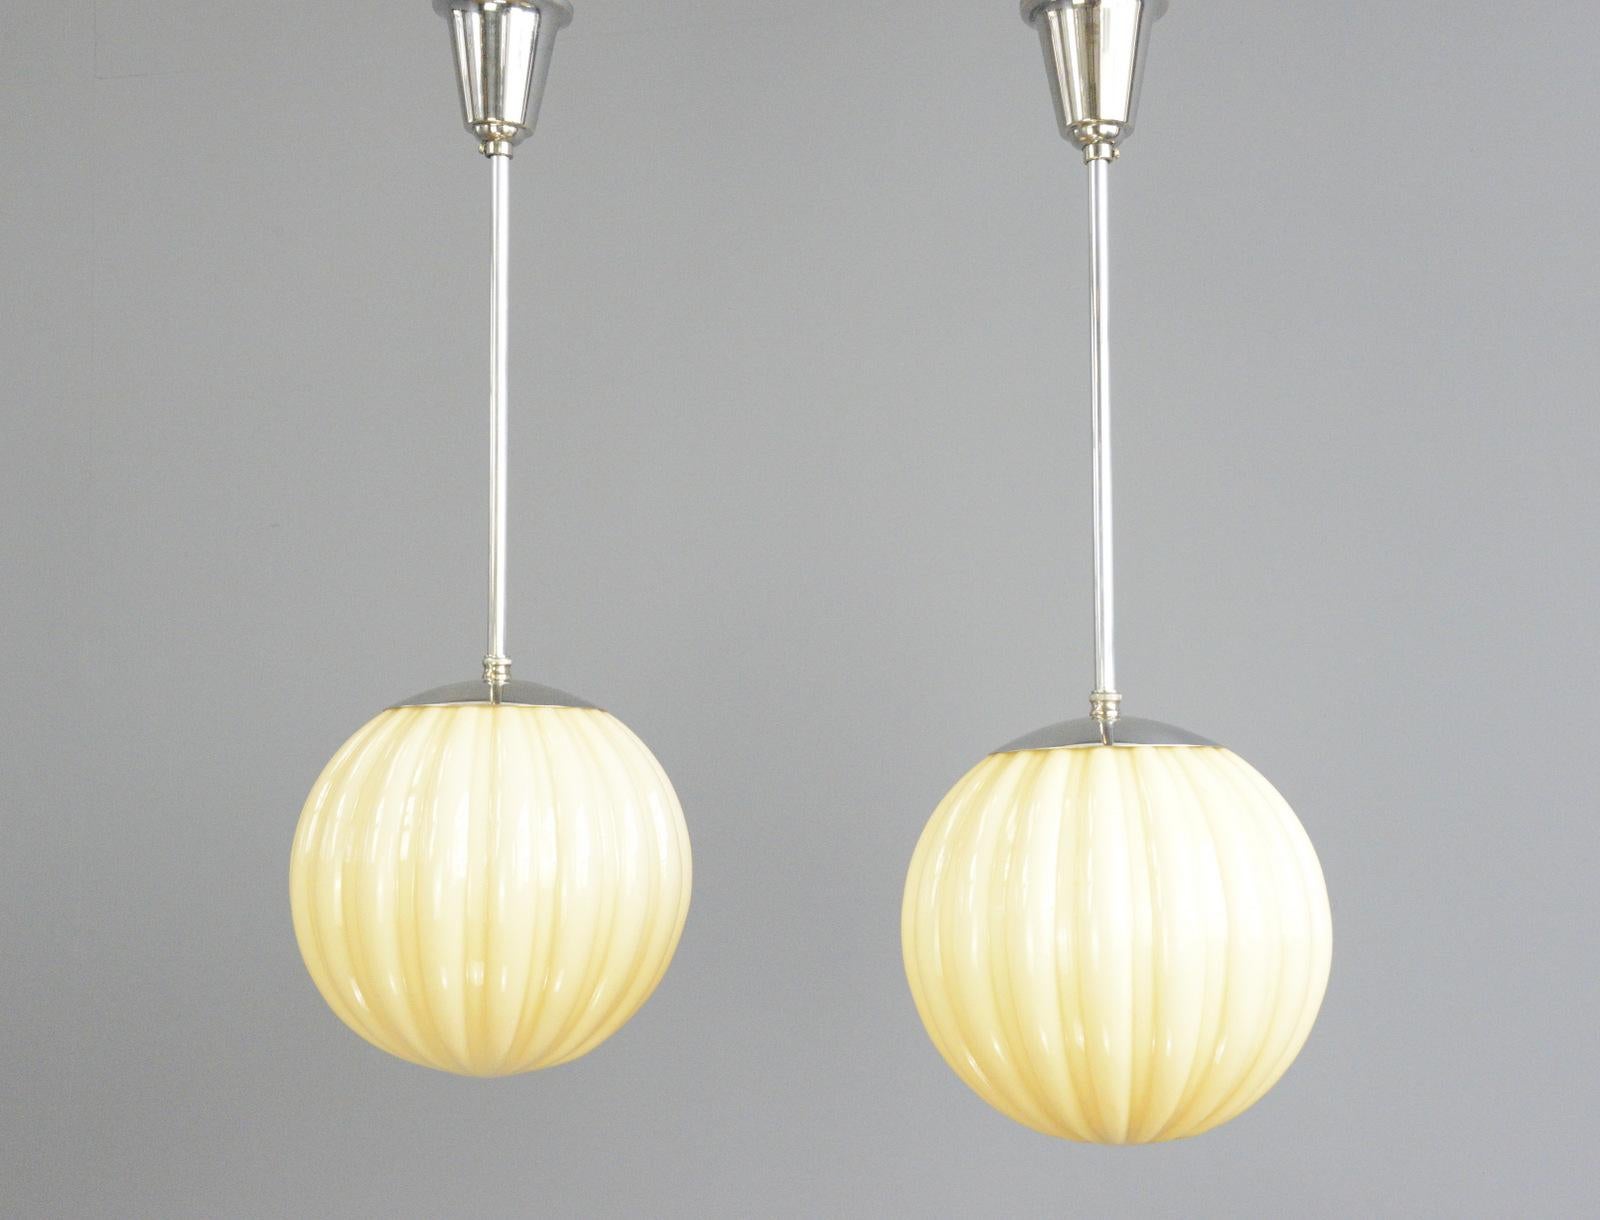 Swedish Art Deco globe pendant lights Circa 1920s.

- Mustard coloured glass
- Textured ribbed glass
- Nickel tops, stems and ceiling rose
- Takes E27 fitting bulbs
- Swedish ~ 1920s
- 26cm x 68cm tall inc stem and ceiling rose

Condition